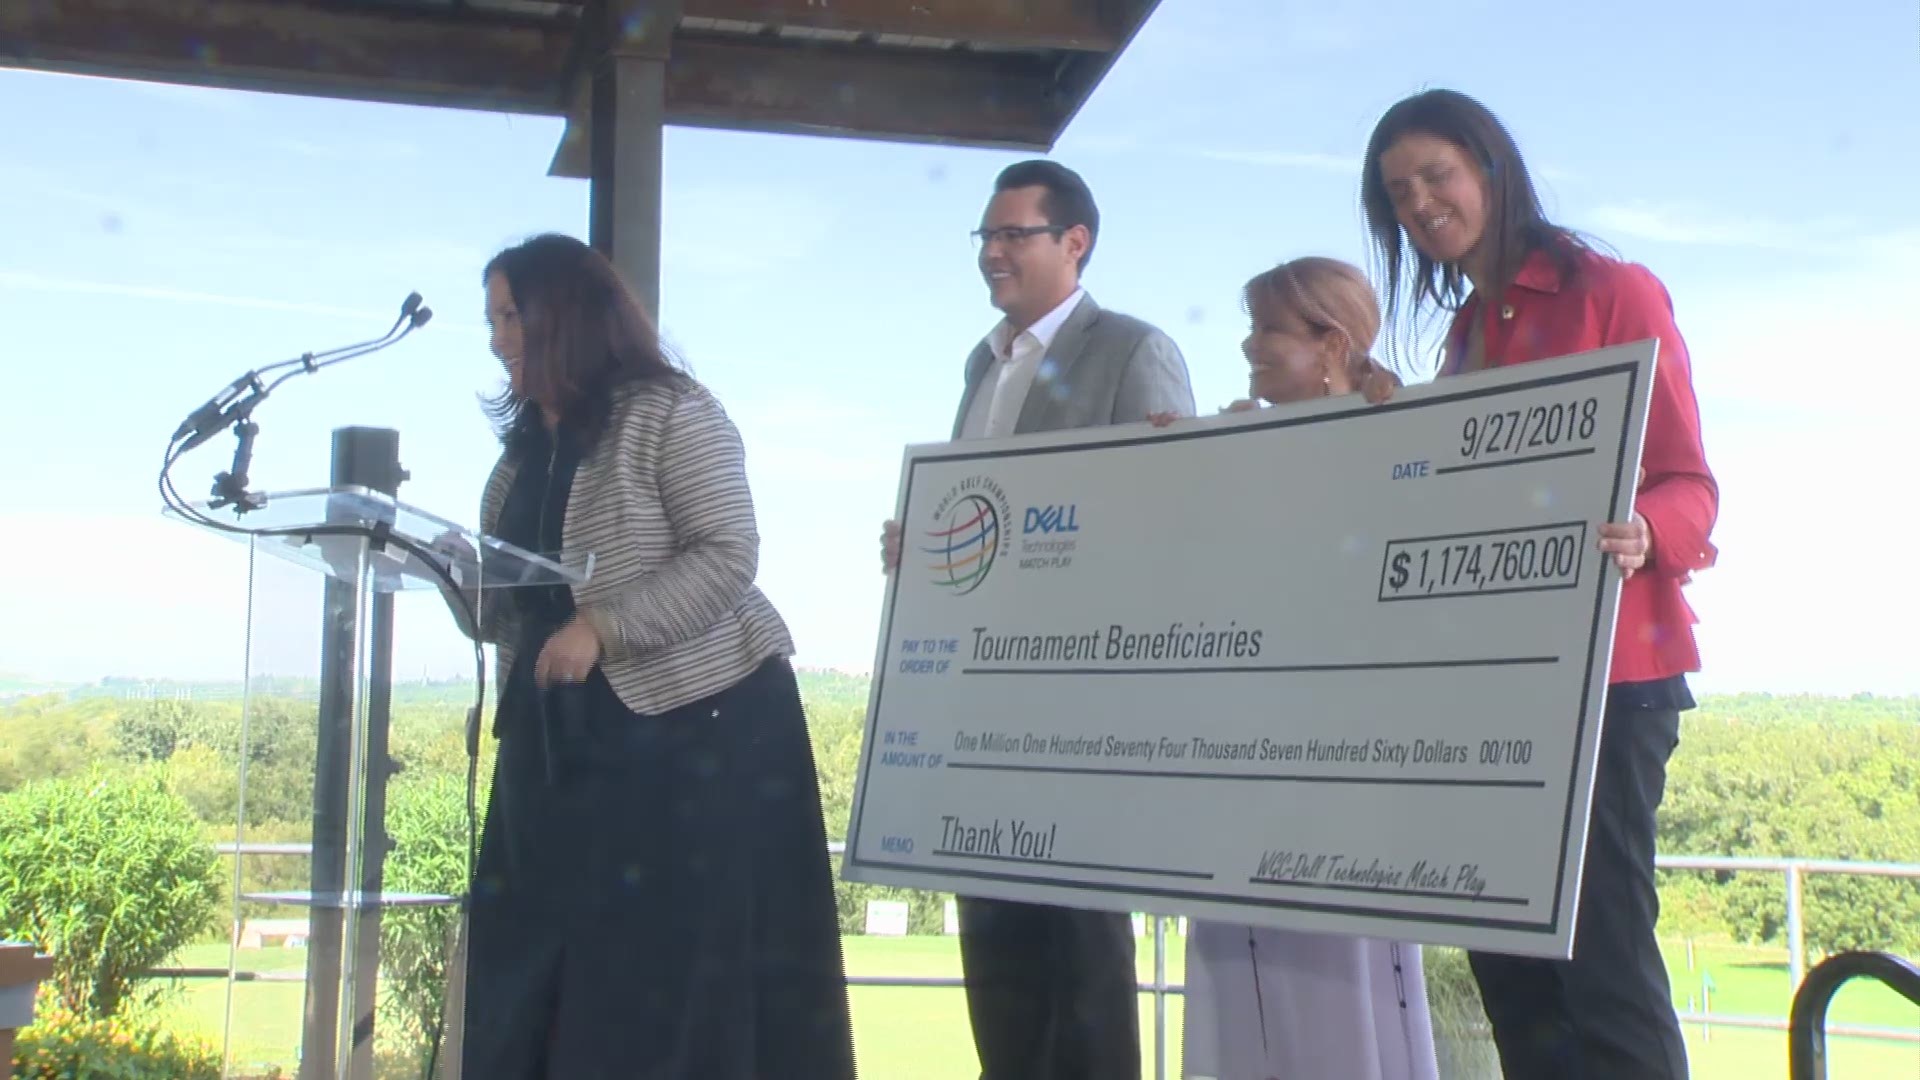 Dell Technologies Match Play donated $1.2 million dollar to the tournament's five charity partners.